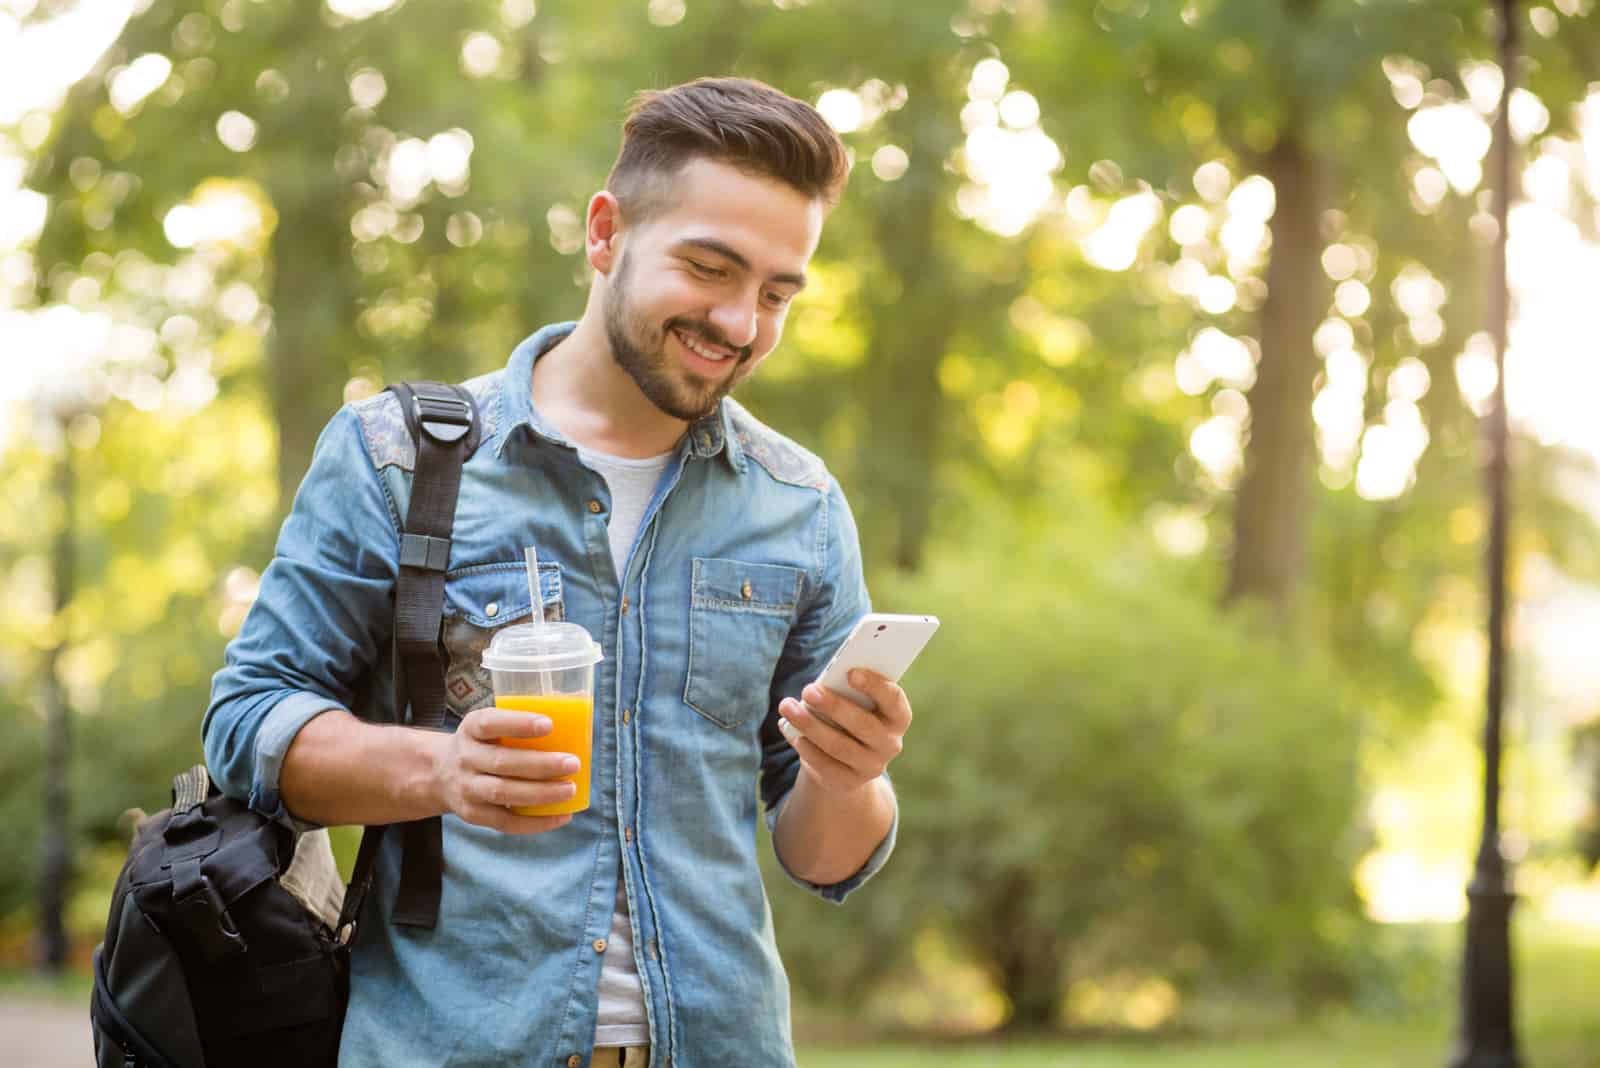 Happy man walking in autumn park and smiling while holding the phone in his hand